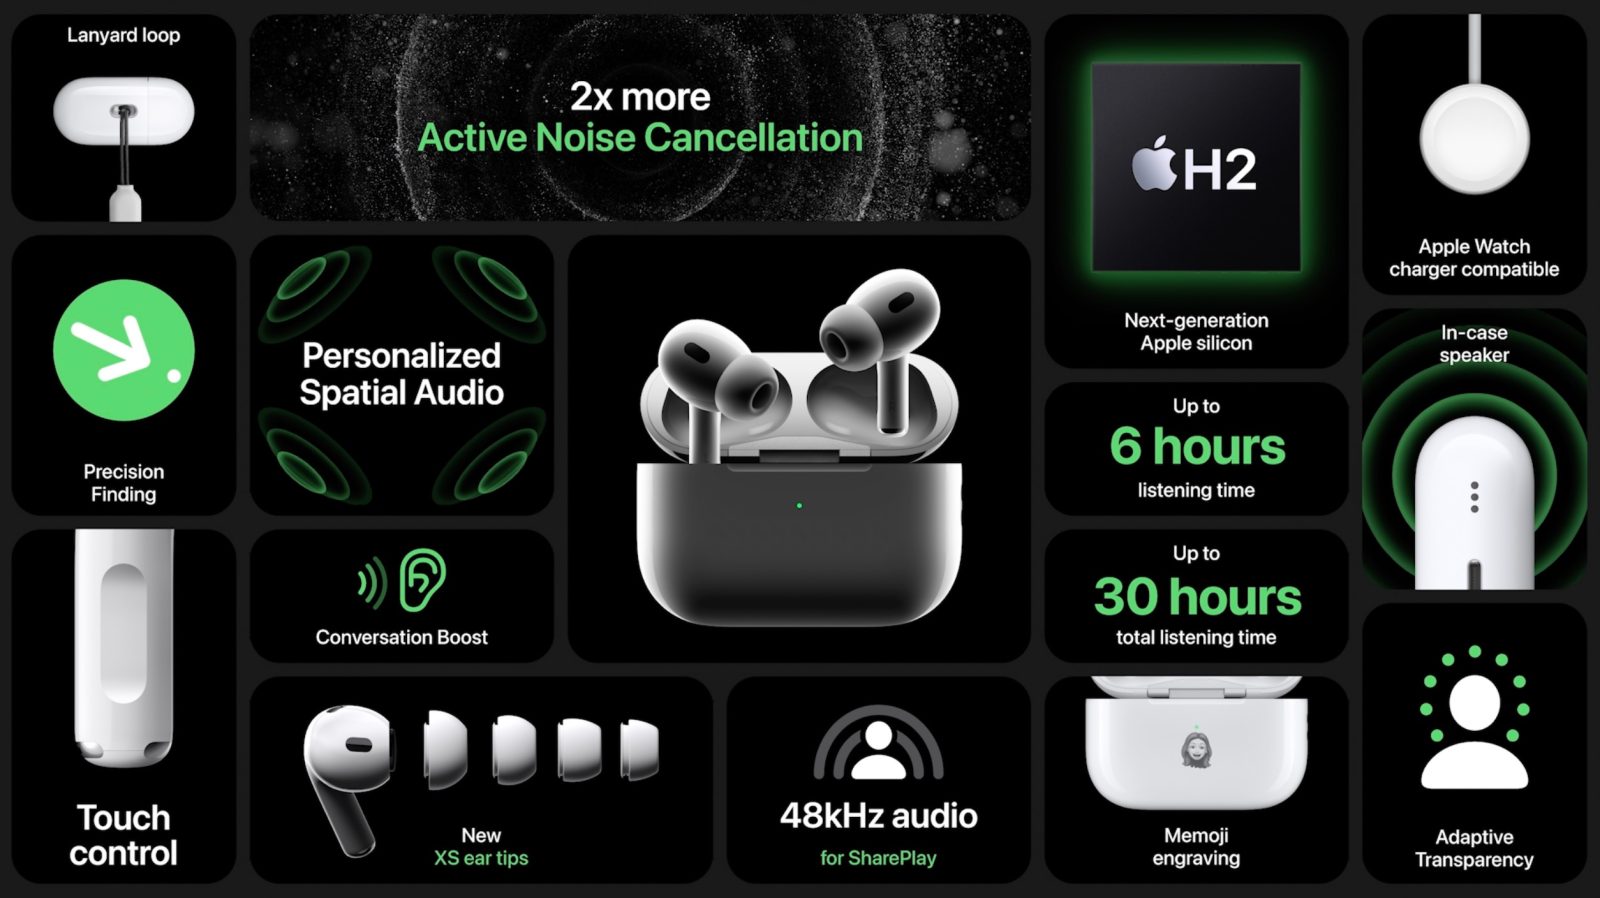 AirPods Pro 2: updates premium earphones with H2 chip, touch more - 9to5Mac